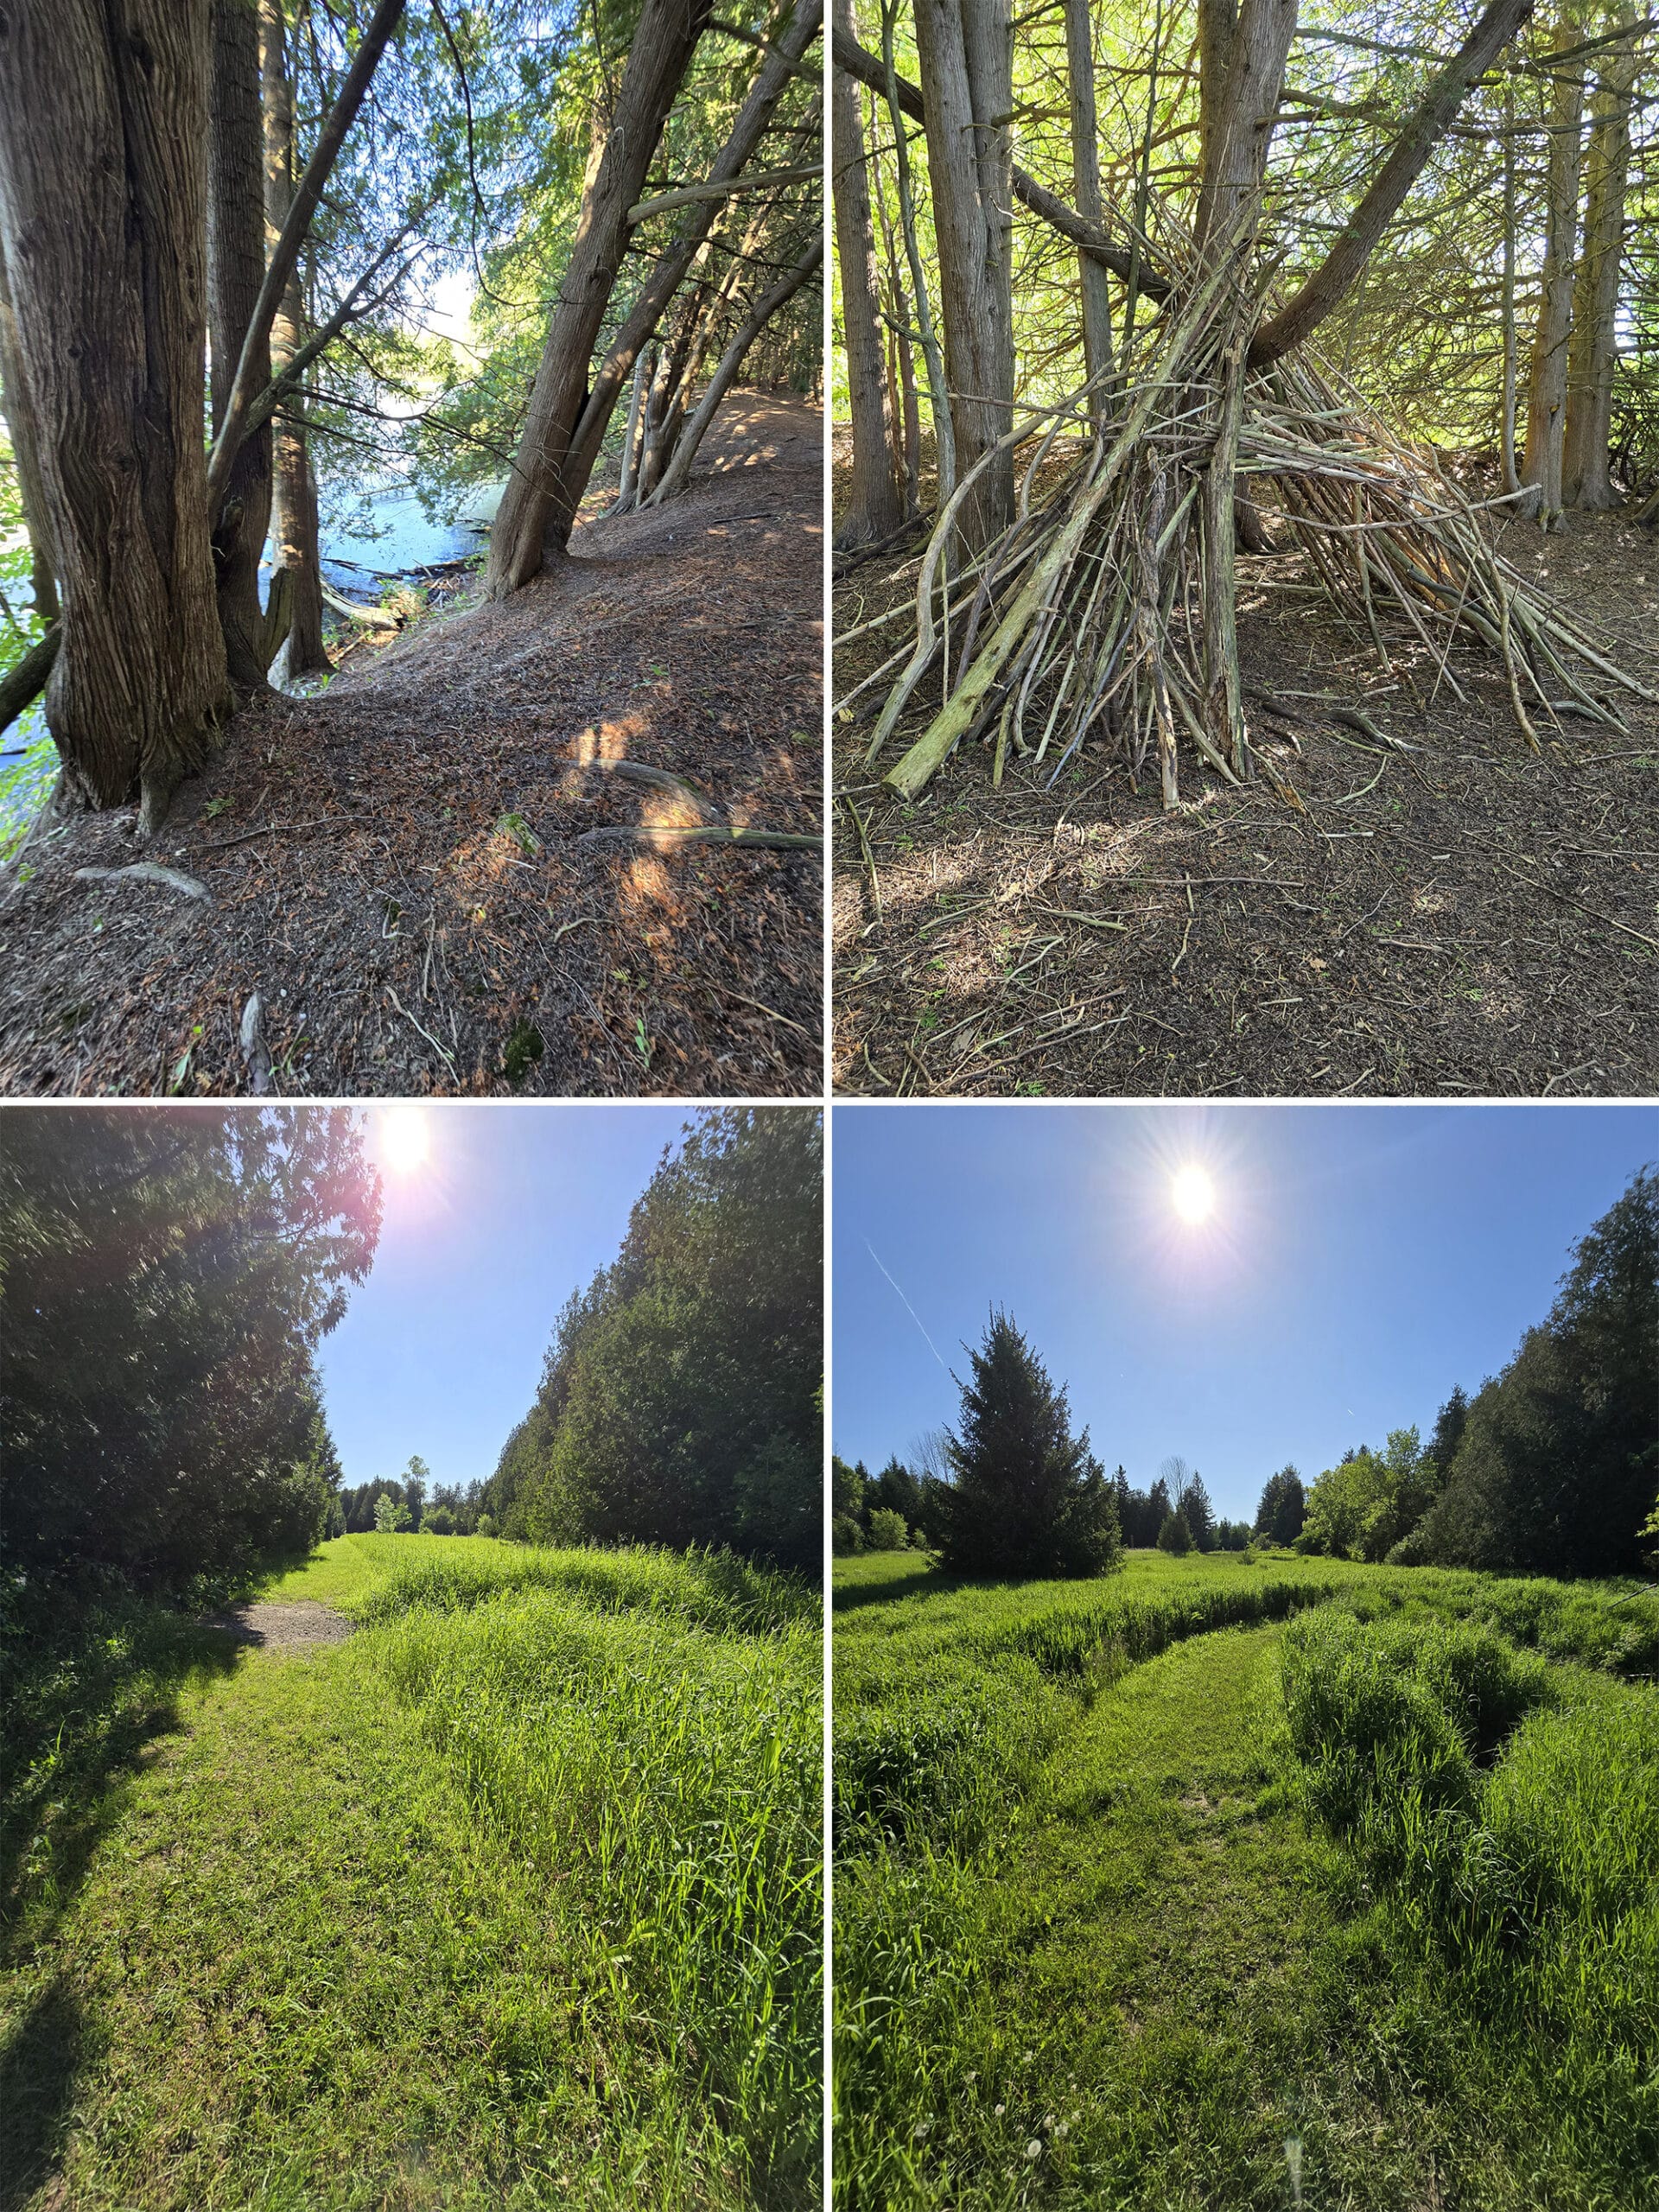 4 part image showing various views along the Little Trail.